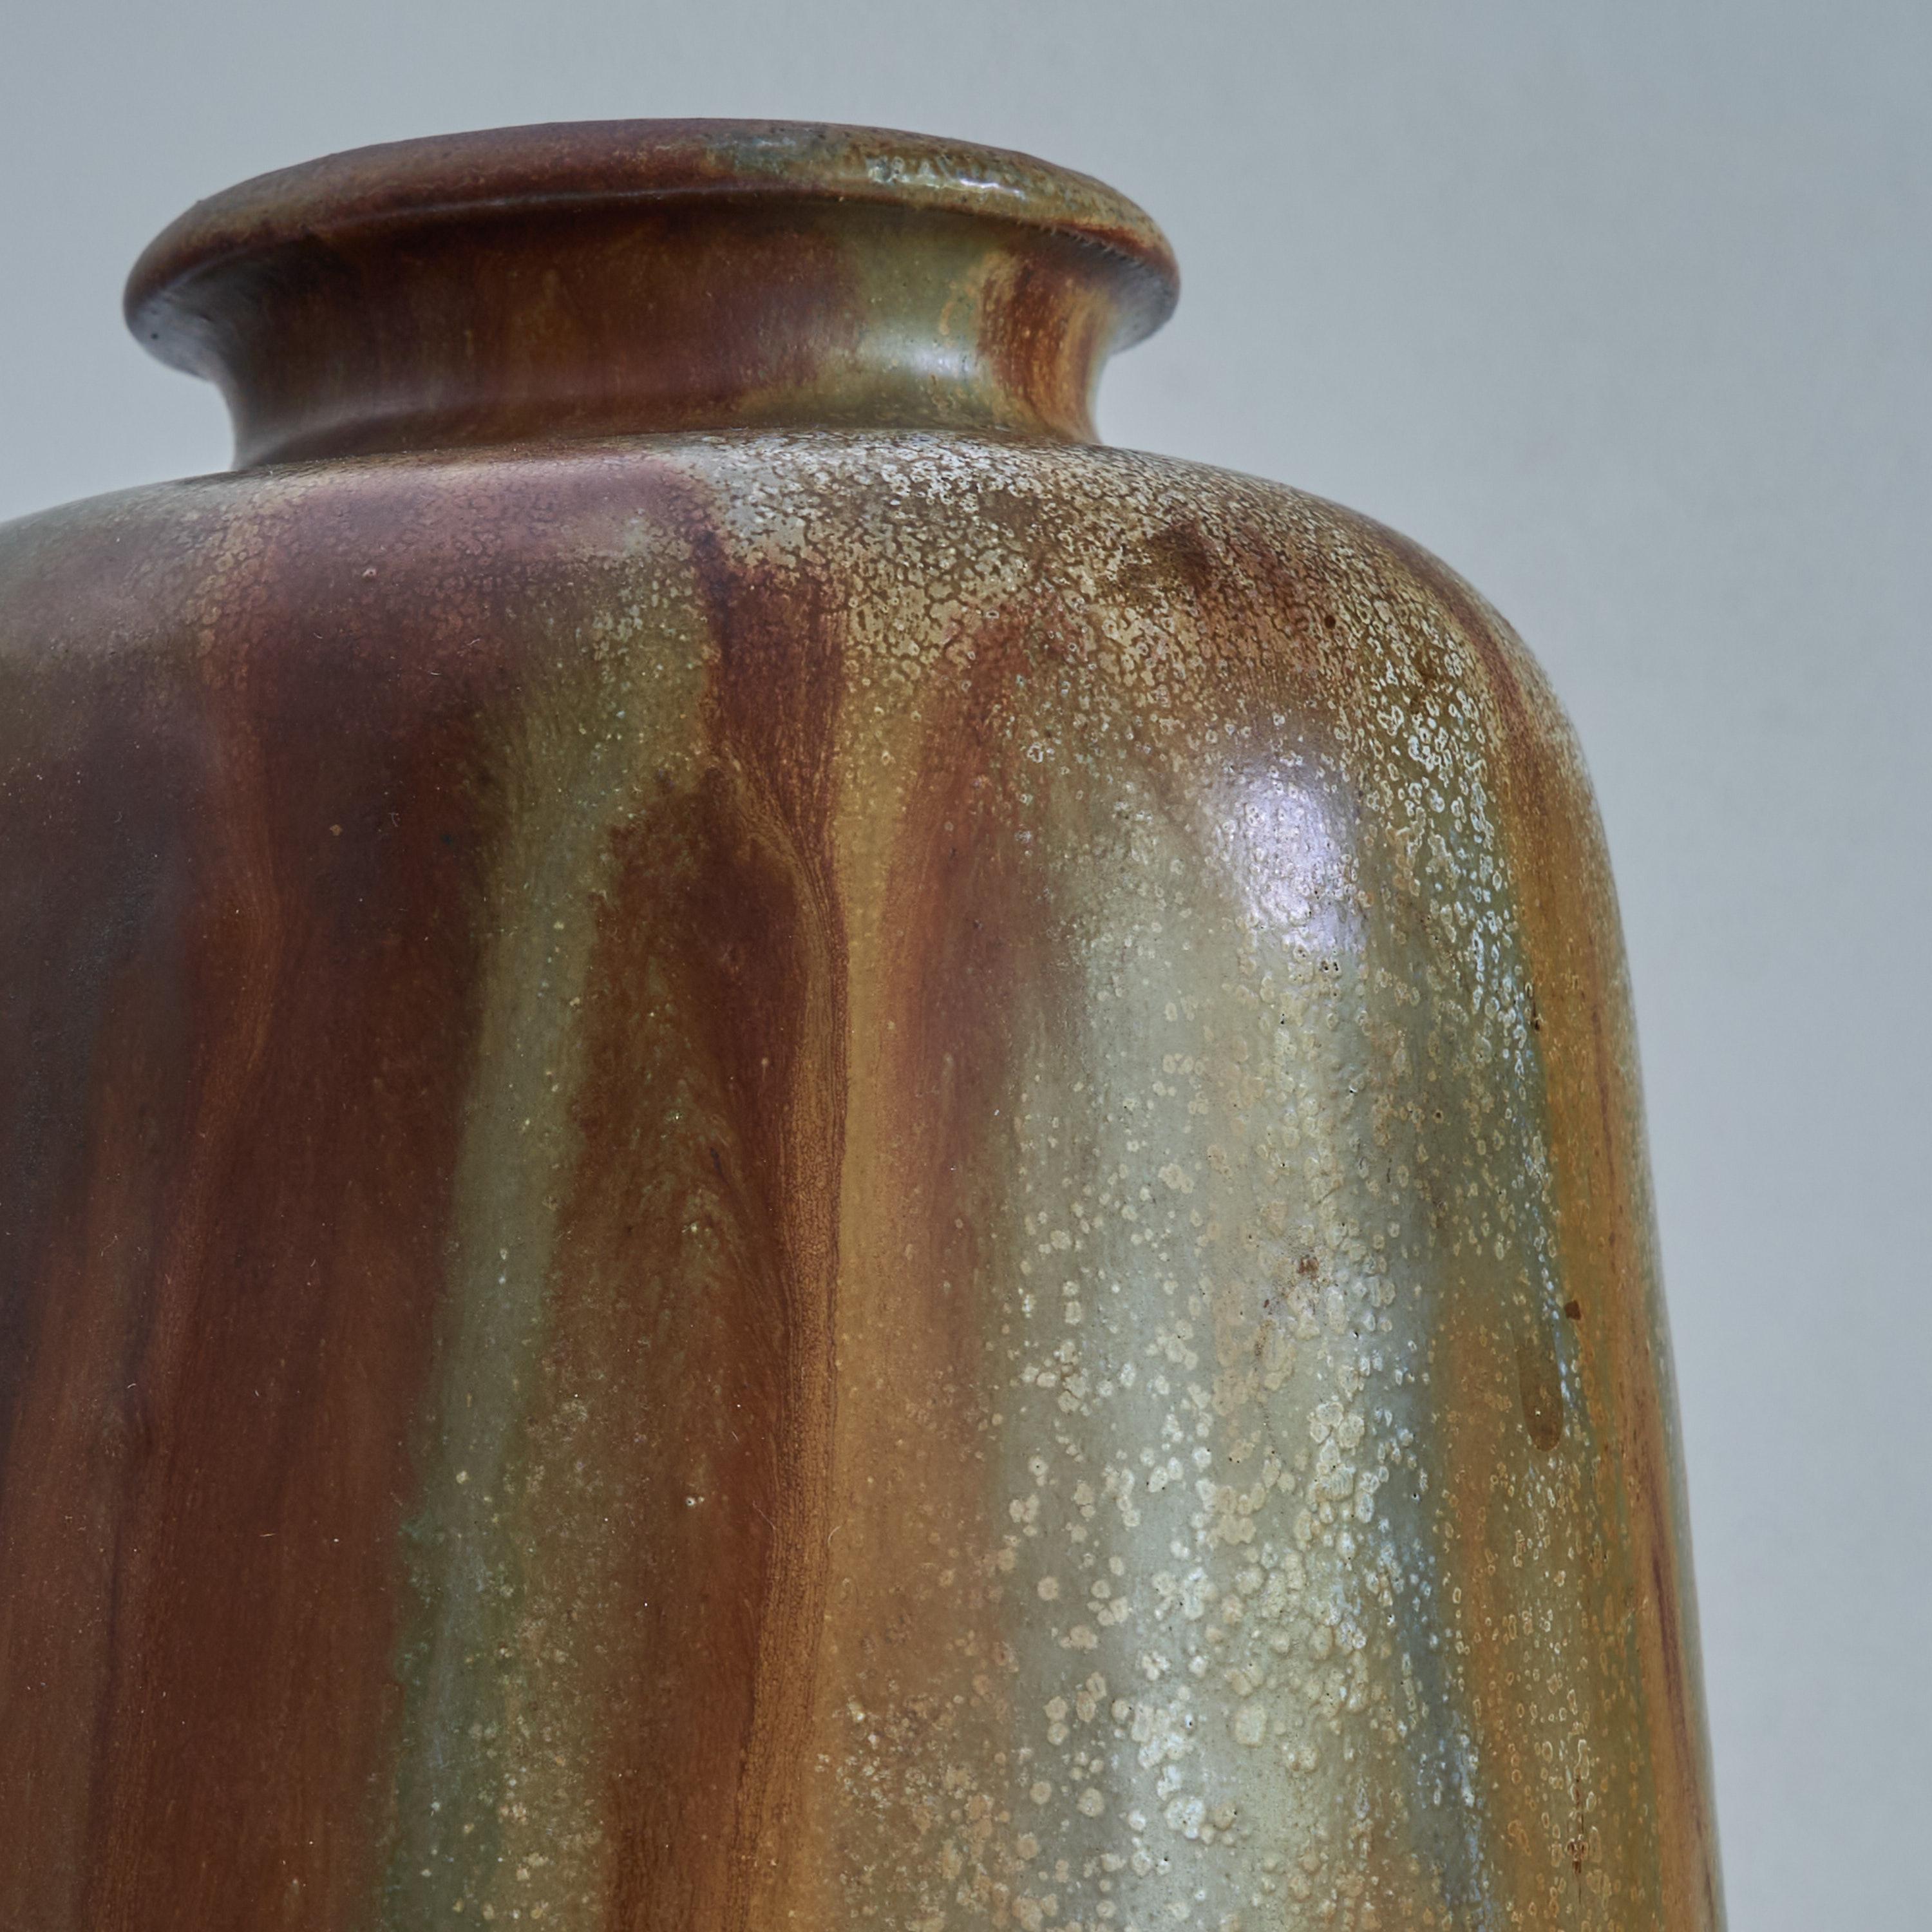 Willy Biron Châtelet 'Grès Salé Grand Feu' Studio Pottery Vase, 1950s In Good Condition For Sale In Tilburg, NL